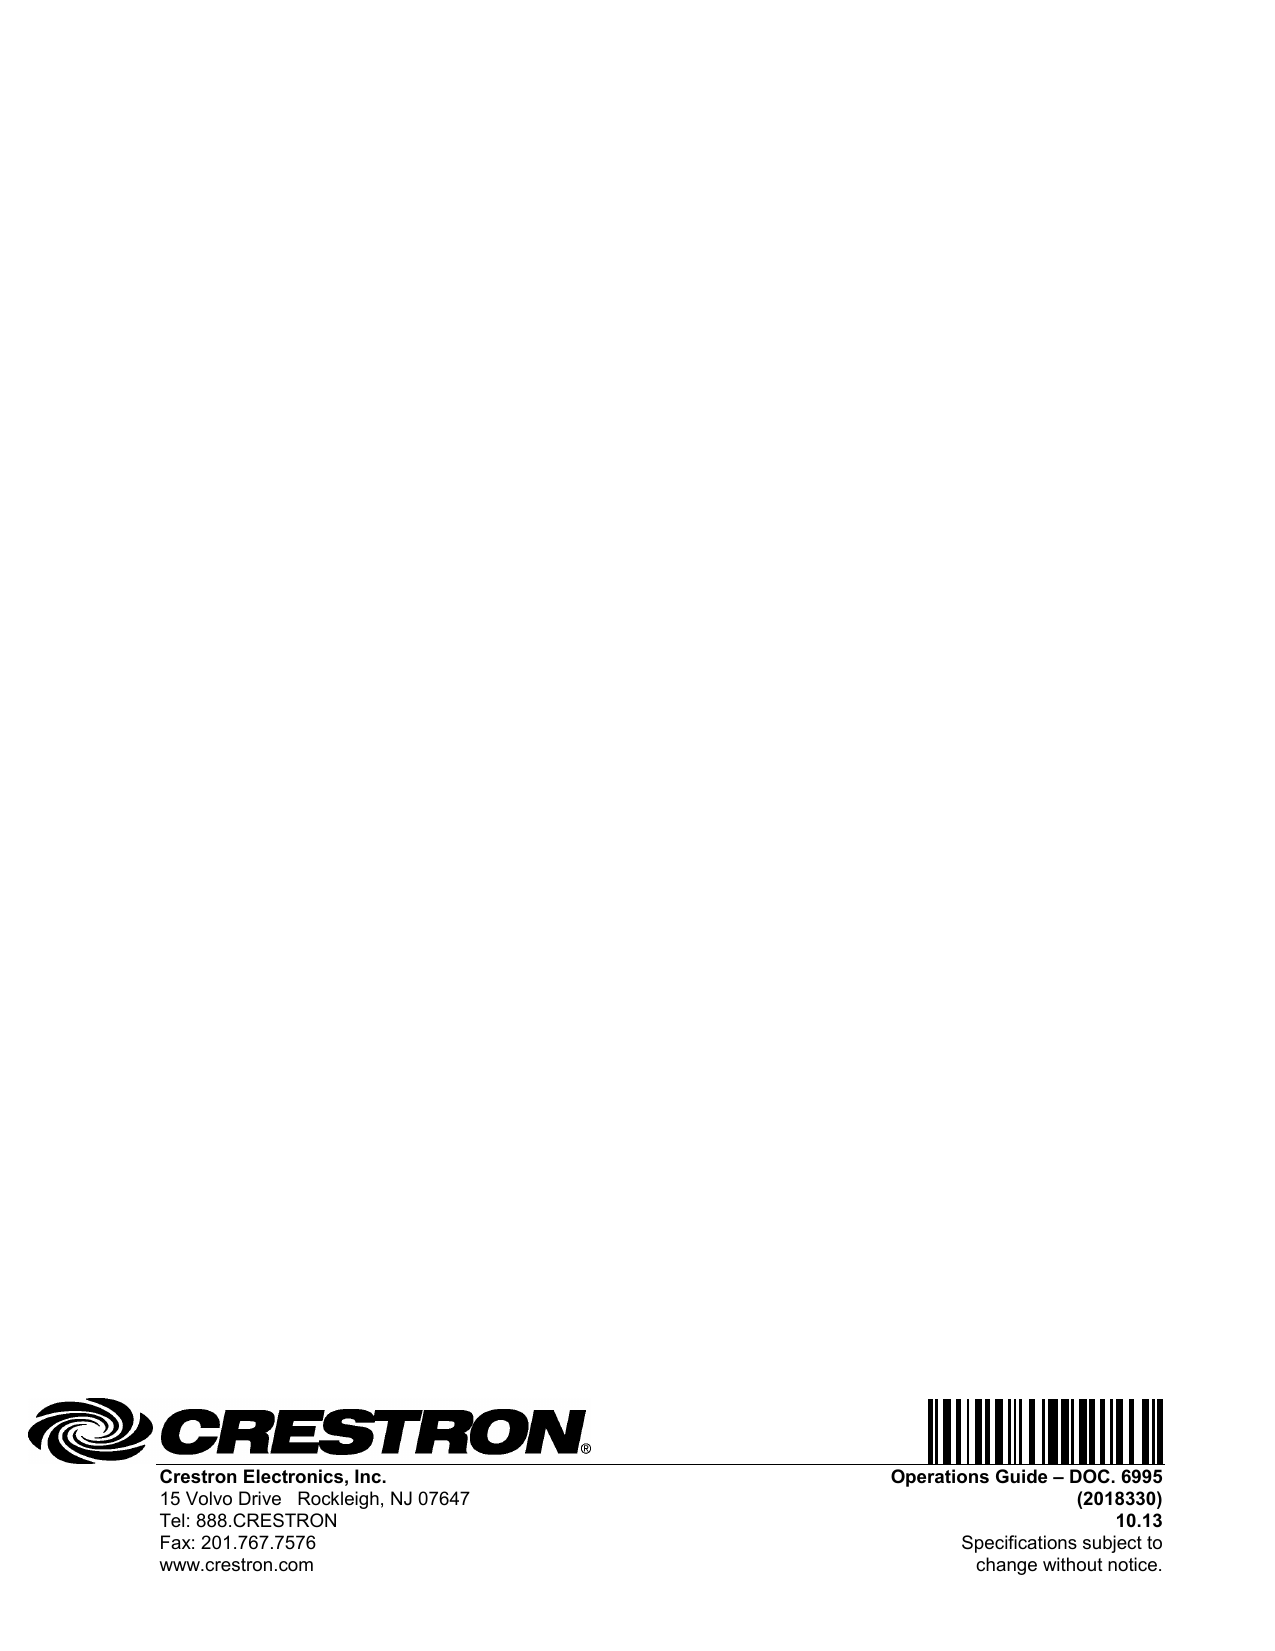     Crestron Electronics, Inc. Operations Guide – DOC. 6995 15 Volvo Drive   Rockleigh, NJ 07647  (2018330) Tel: 888.CRESTRON 10.13 Fax: 201.767.7576  Specifications subject to www.crestron.com change without notice.  